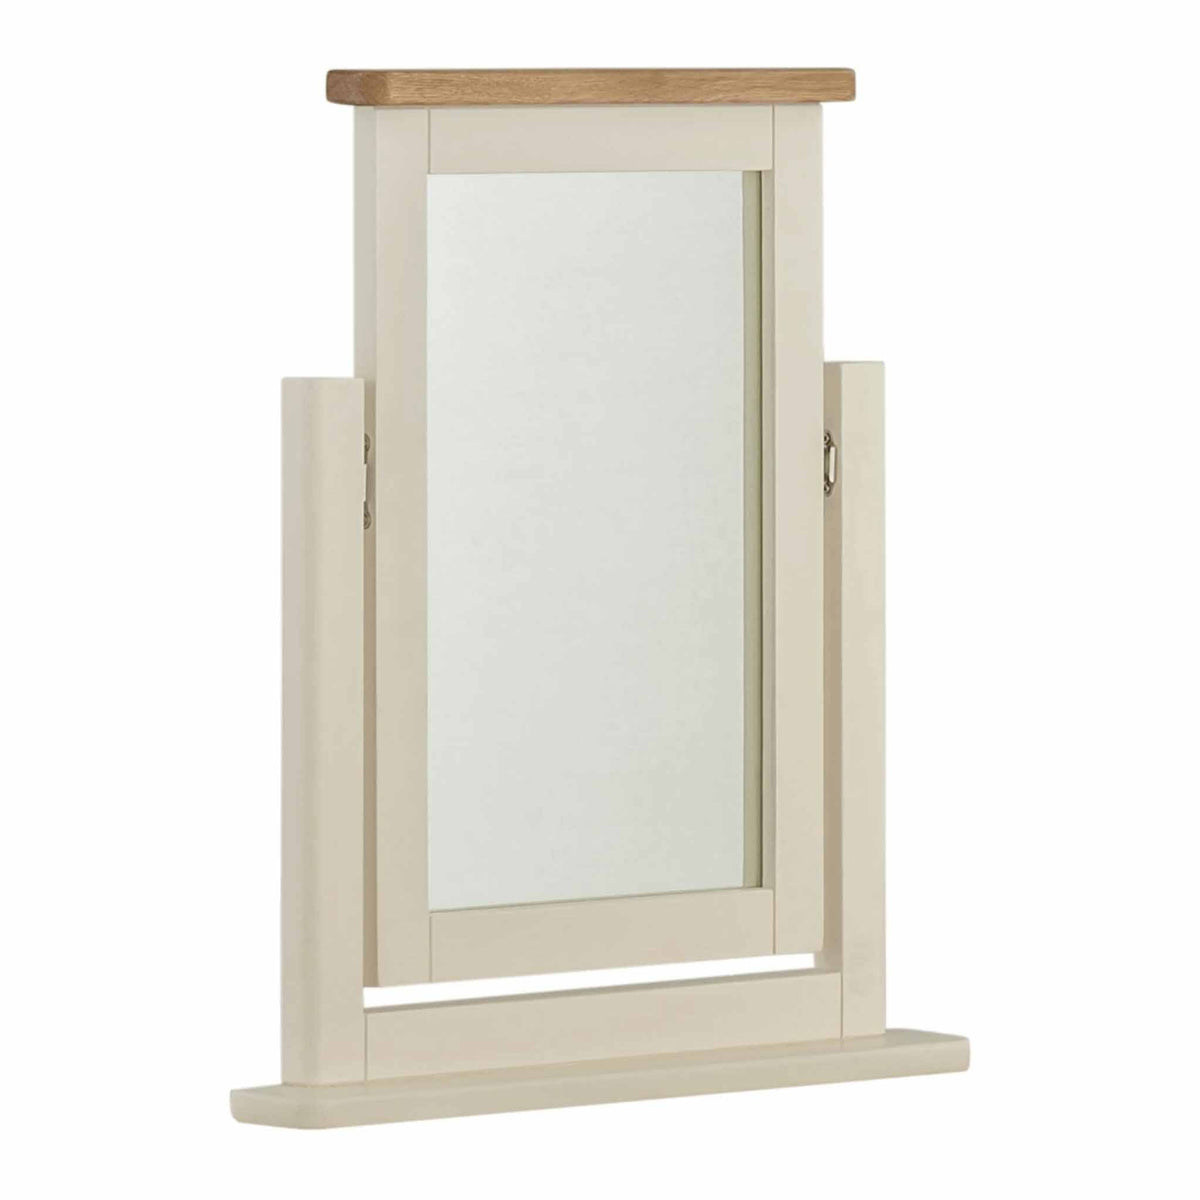 The Padstow Cream Wooden Swivel Mirror for Dressing Table